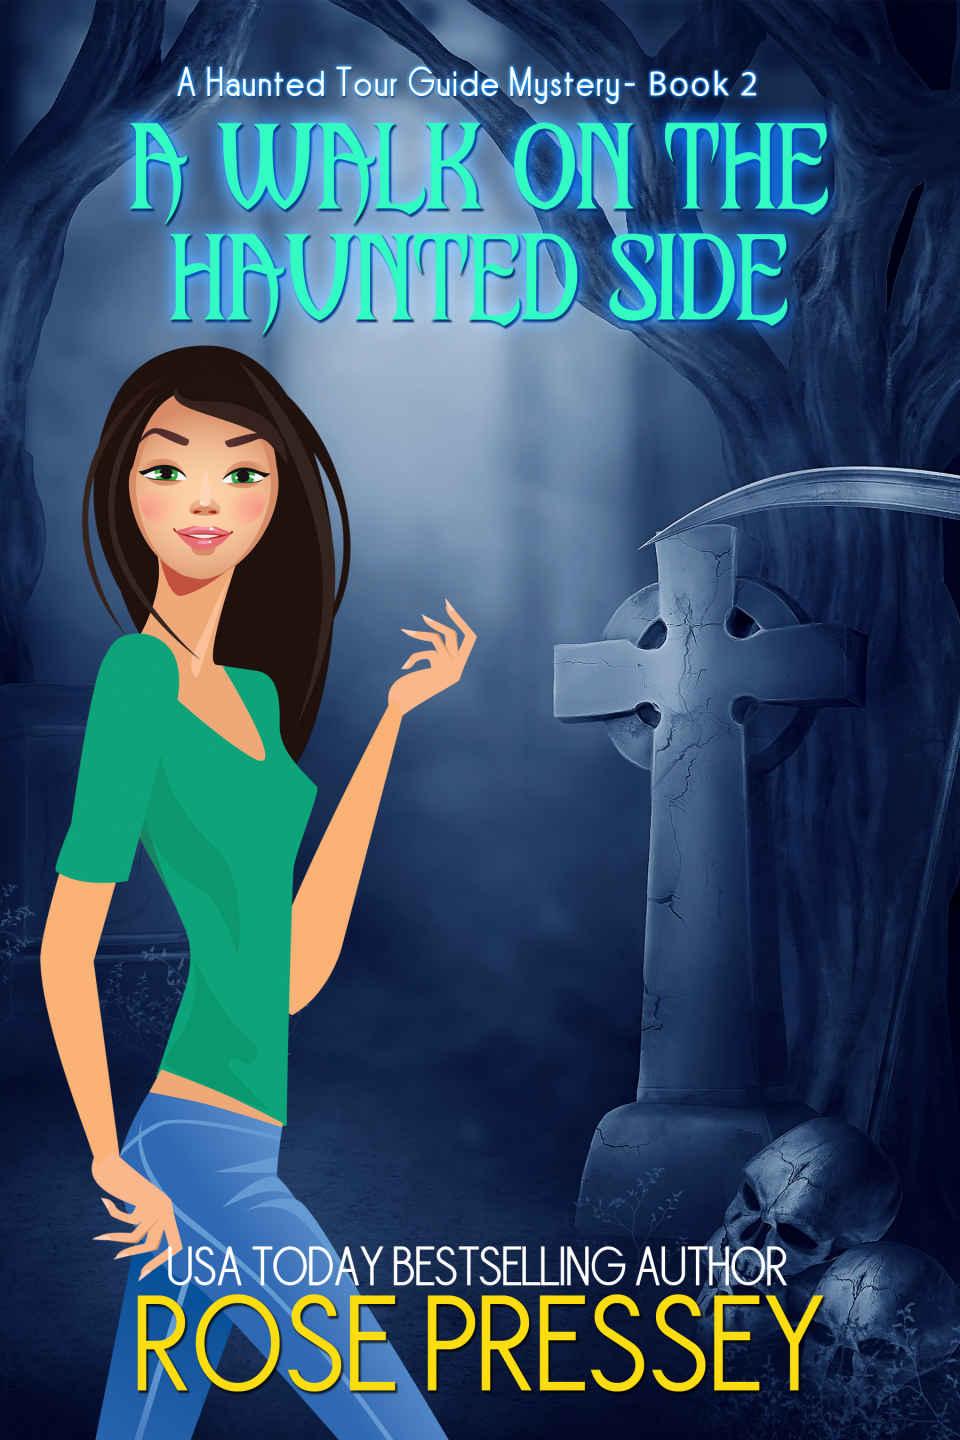 A Walk on the Haunted Side (Haunted Tour Guide Mystery Book 2)